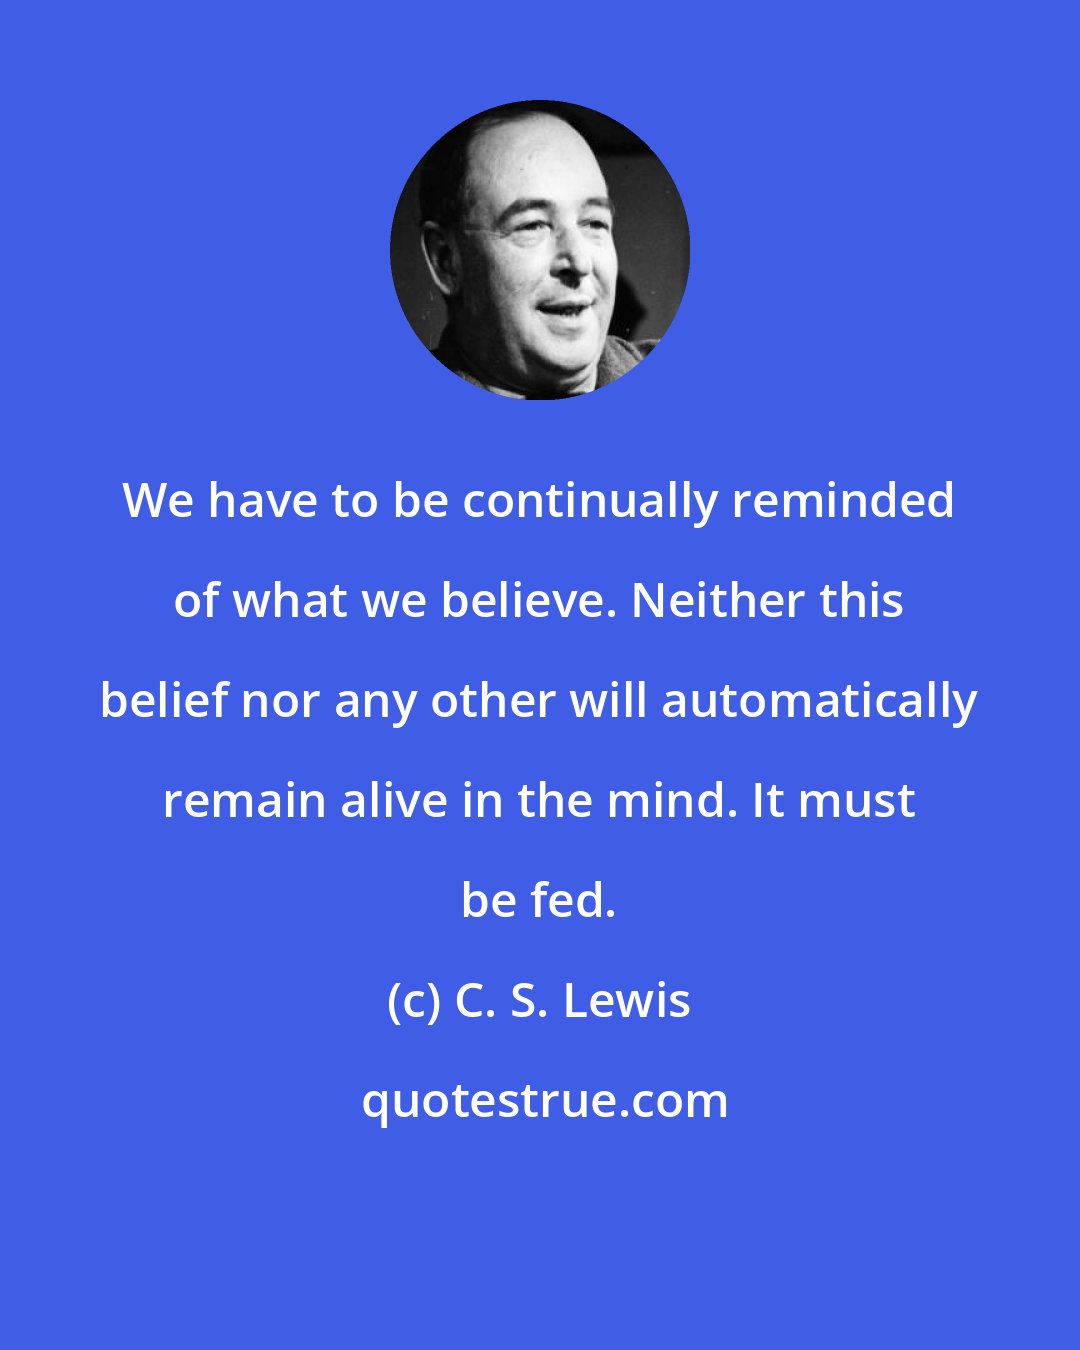 C. S. Lewis: We have to be continually reminded of what we believe. Neither this belief nor any other will automatically remain alive in the mind. It must be fed.